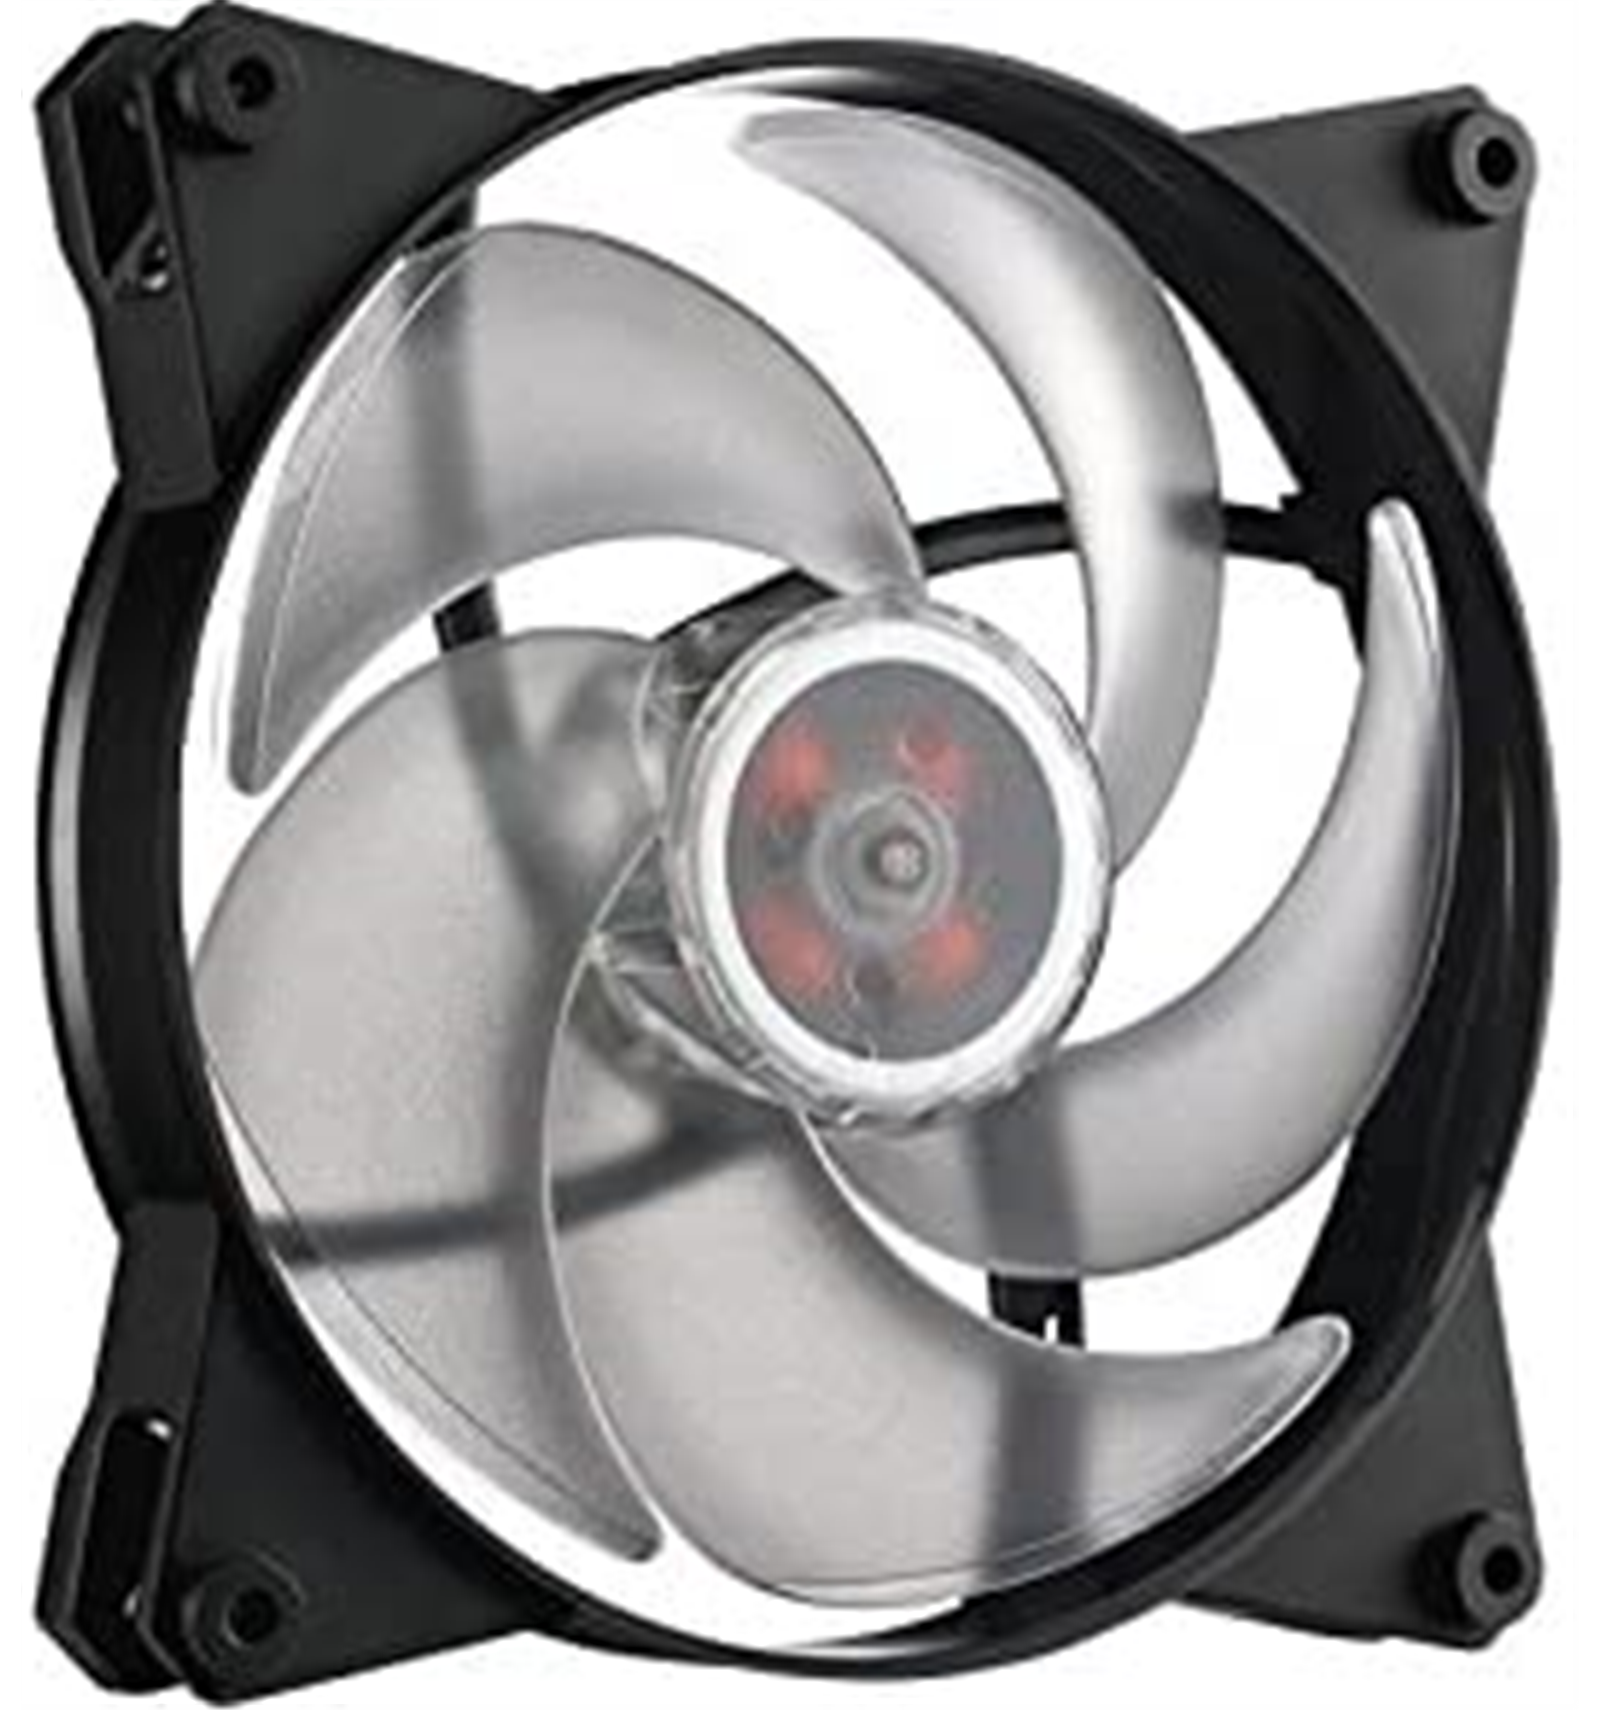 Cooler Master MasterFan Pro 140 Air Flow RGB PACK, ventola 140mm LED, 650  1500 RPM, 3in1 con controller RGB - DaxStore S.R.L.S.